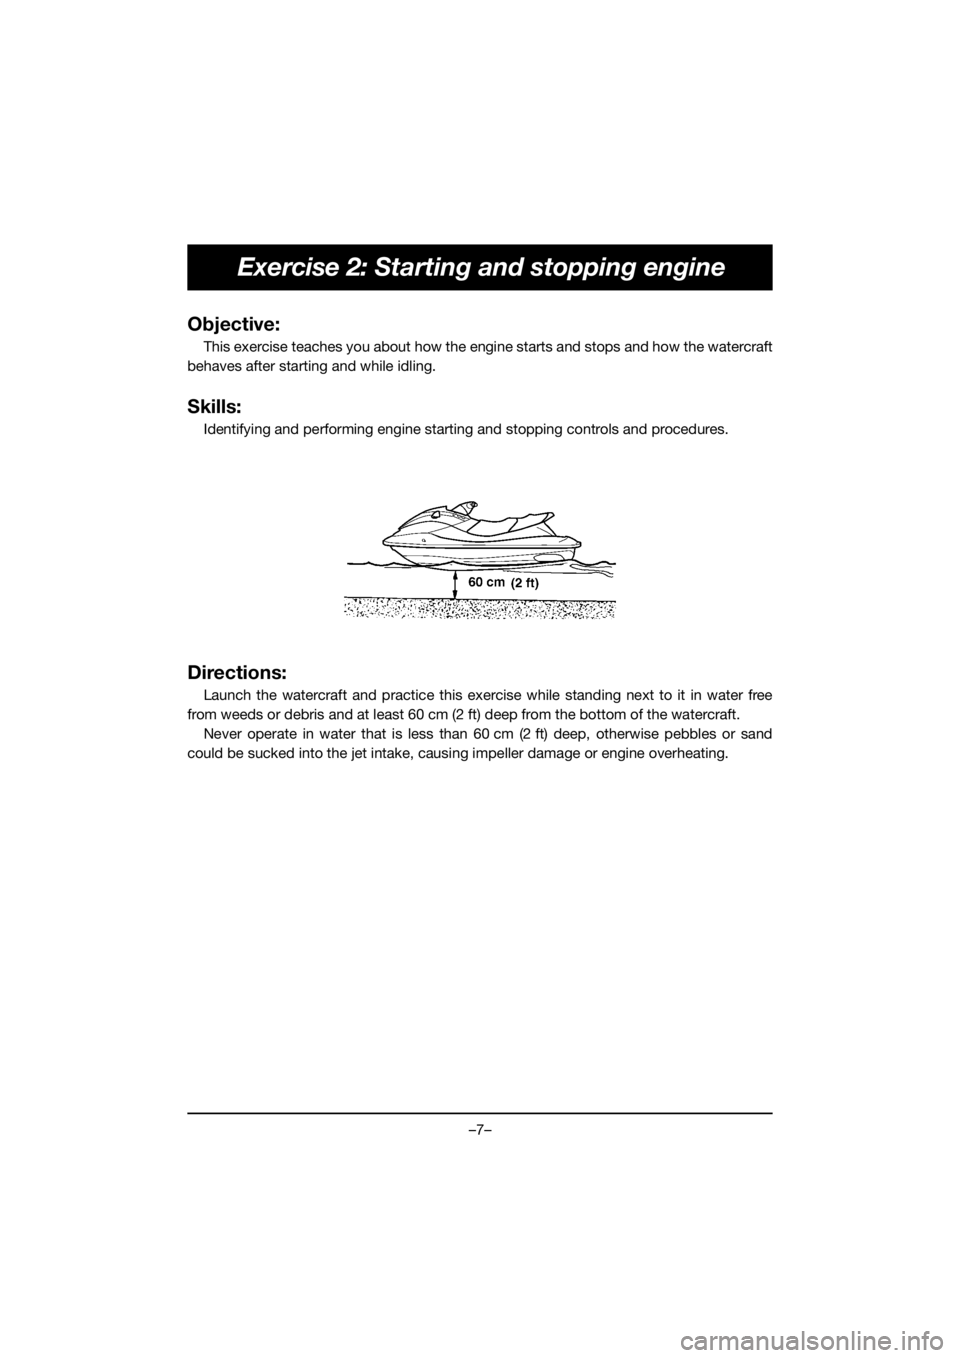 YAMAHA EX SPORT 2020  Manuale de Empleo (in Spanish) –7–
Exercise 2: Starting and stopping engine
Objective:
This exercise teaches you about how the engine starts and stops and how the watercraft
behaves after starting and while idling.
Skills:
Iden